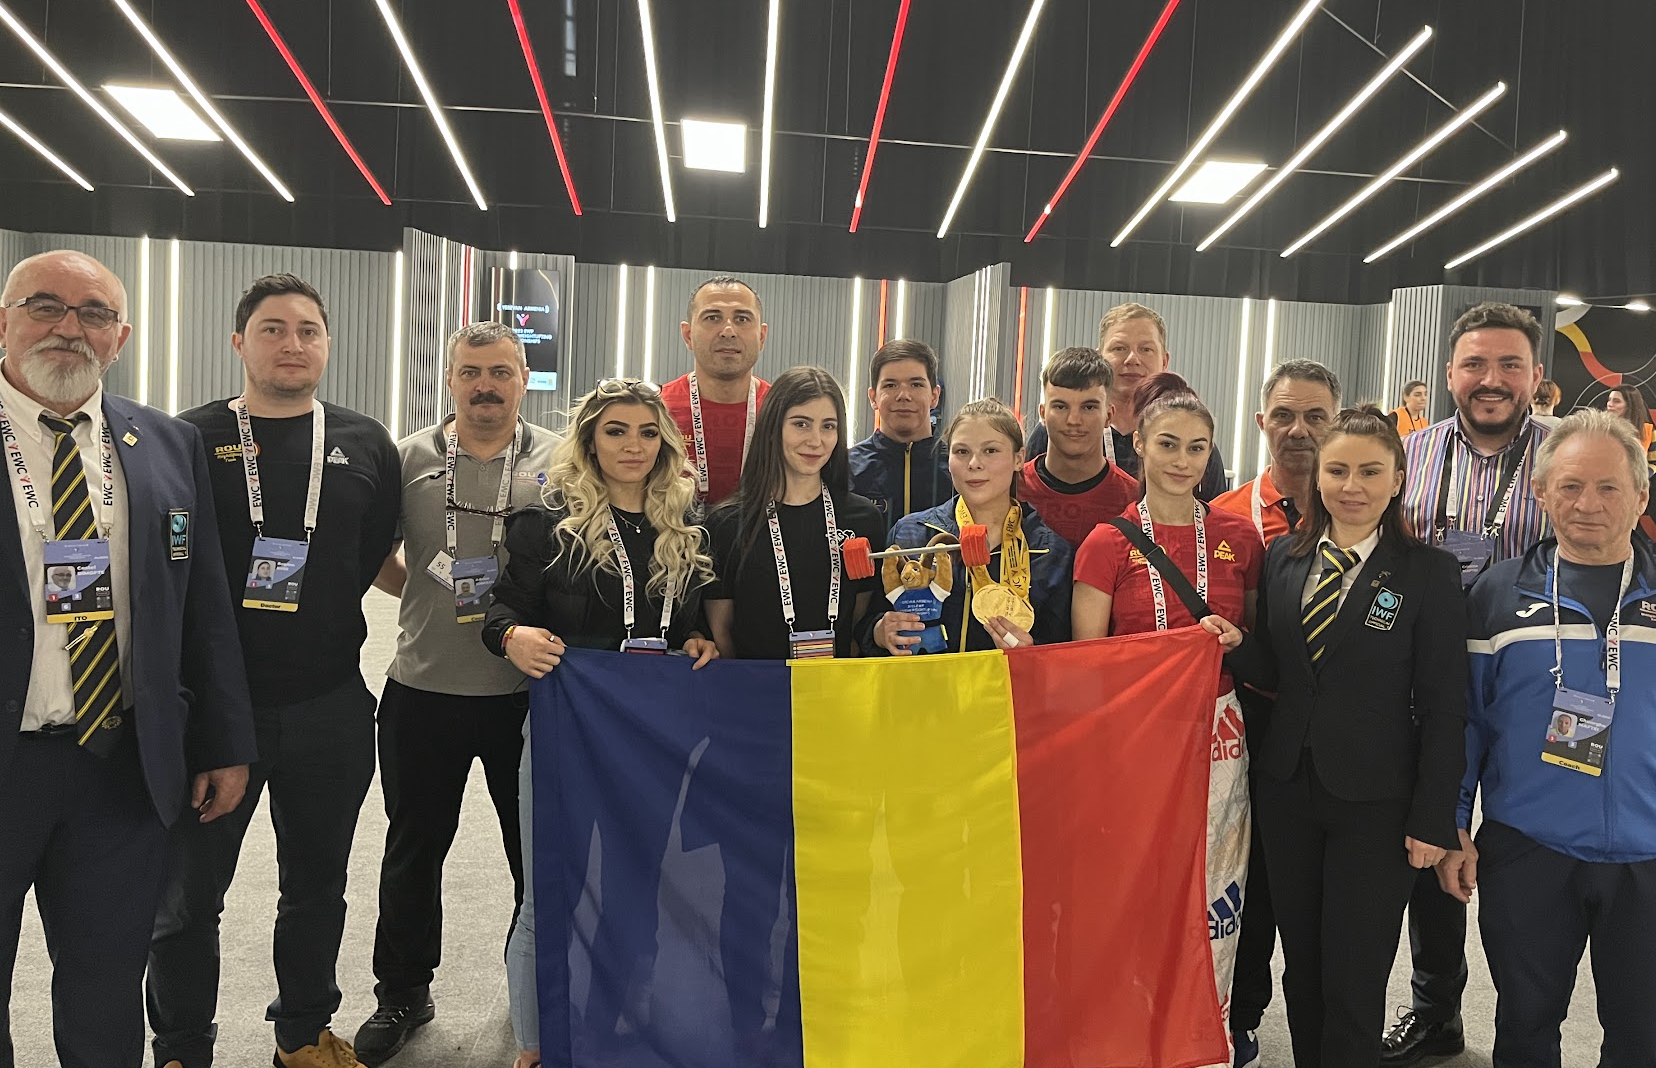 The Romanian delegation celebrate their second gold in as many days at the European Weightlifting Championships in Yerevan ©Brian Oliver